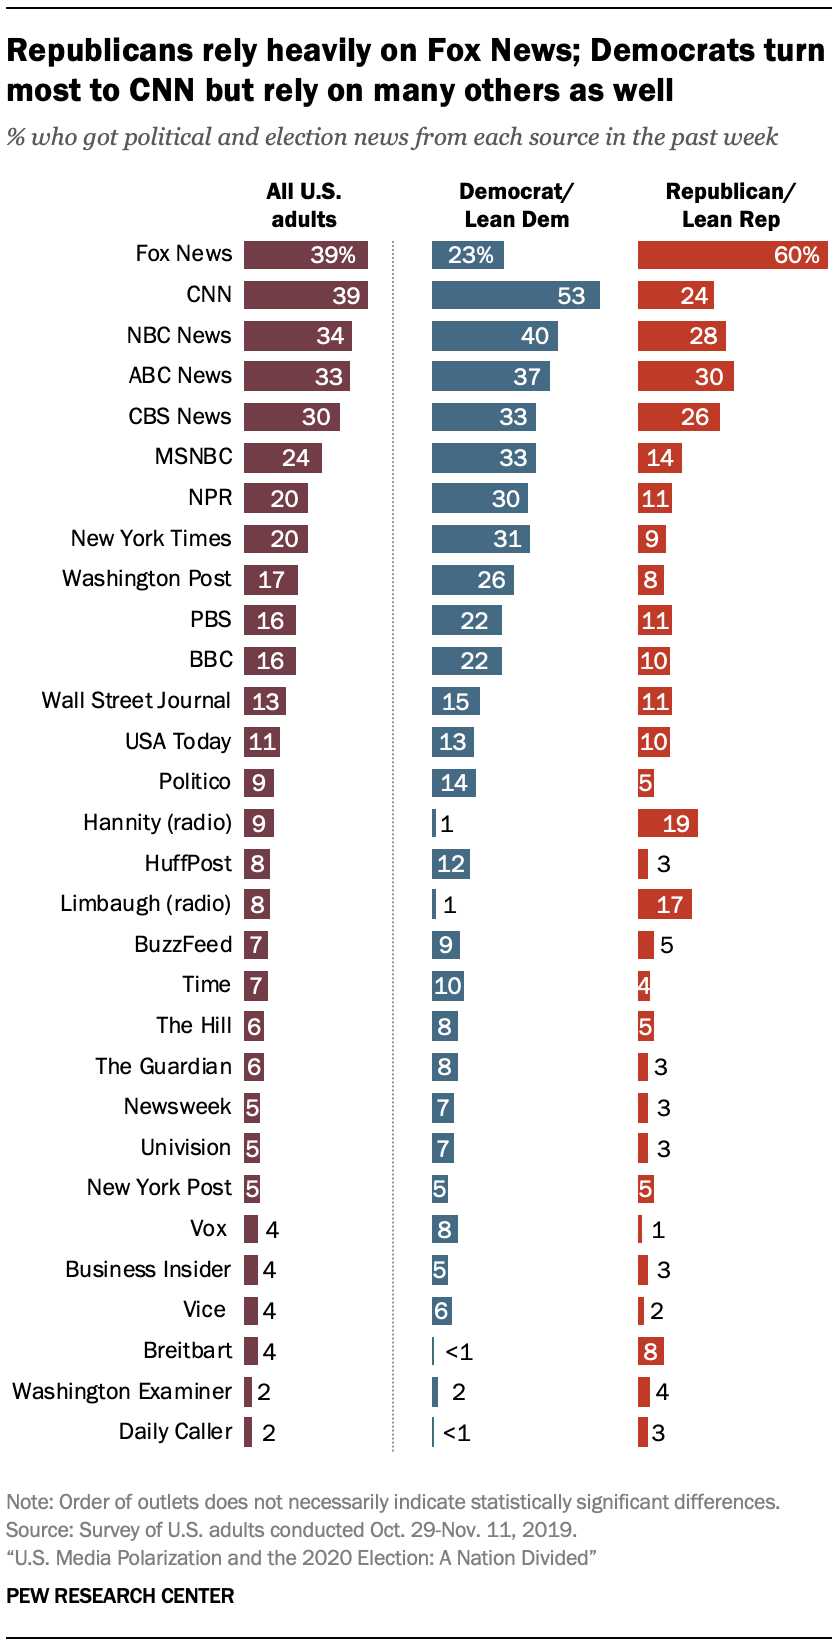 2. Americans are divided by party in the sources they turn to for